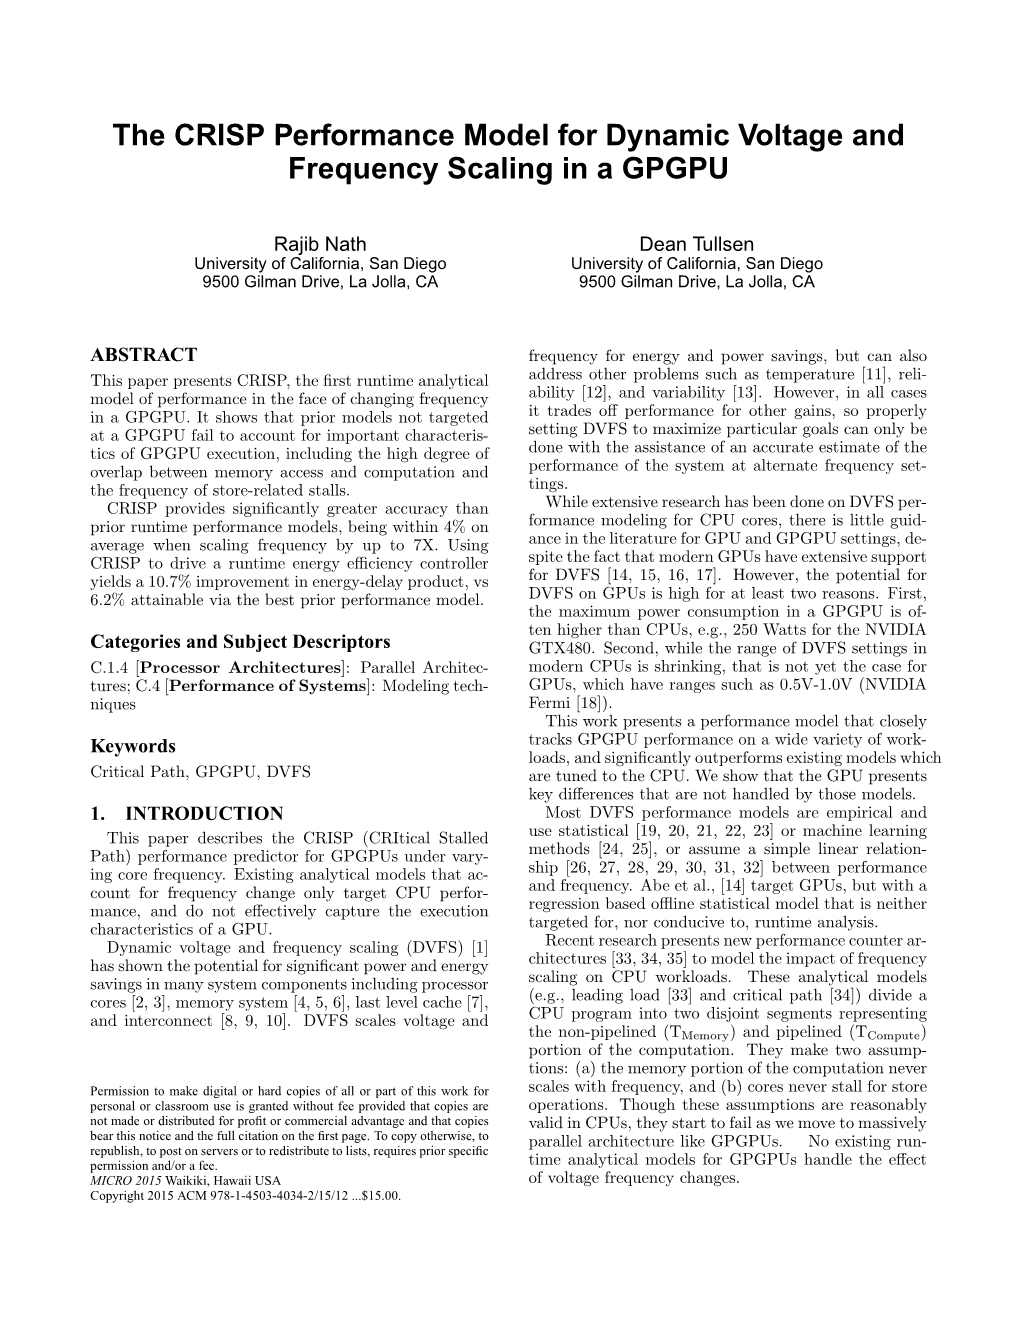 The CRISP Performance Model for Dynamic Voltage and Frequency Scaling in a GPGPU